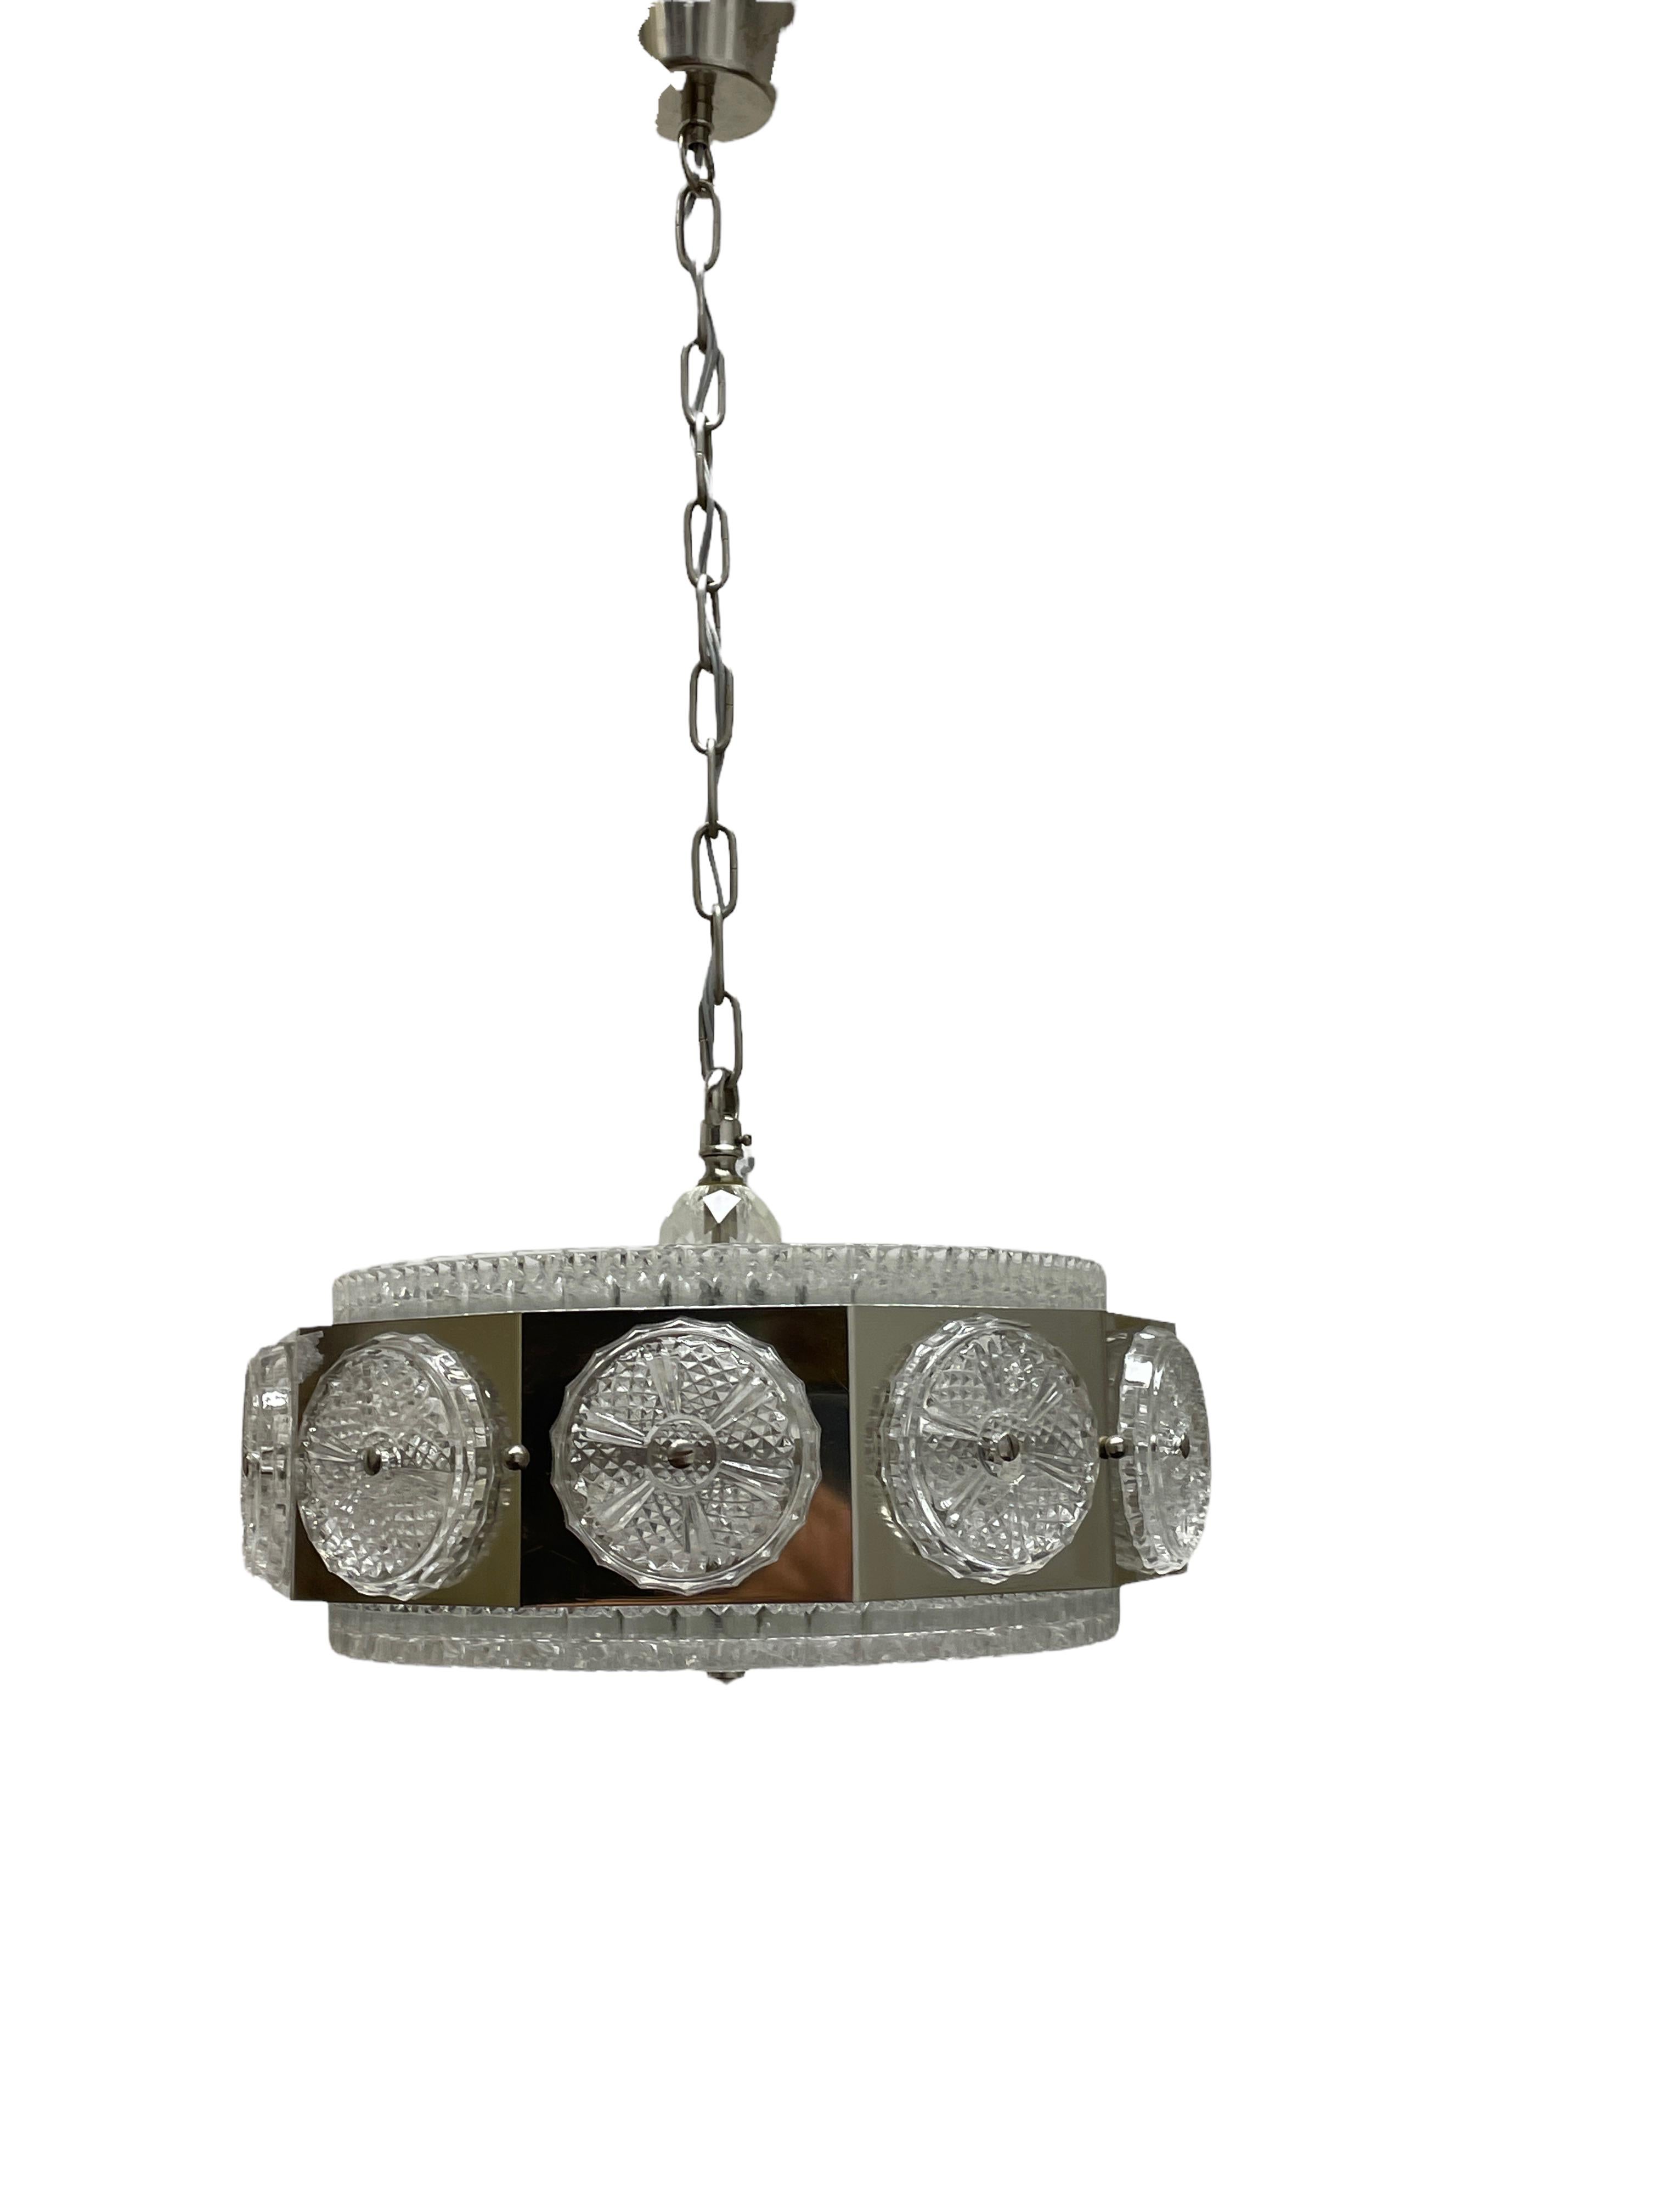 Mid-20th Century 1960s, Space Age Glass and Chrome Chandelier by Carl Fagerlund for Orrefors For Sale